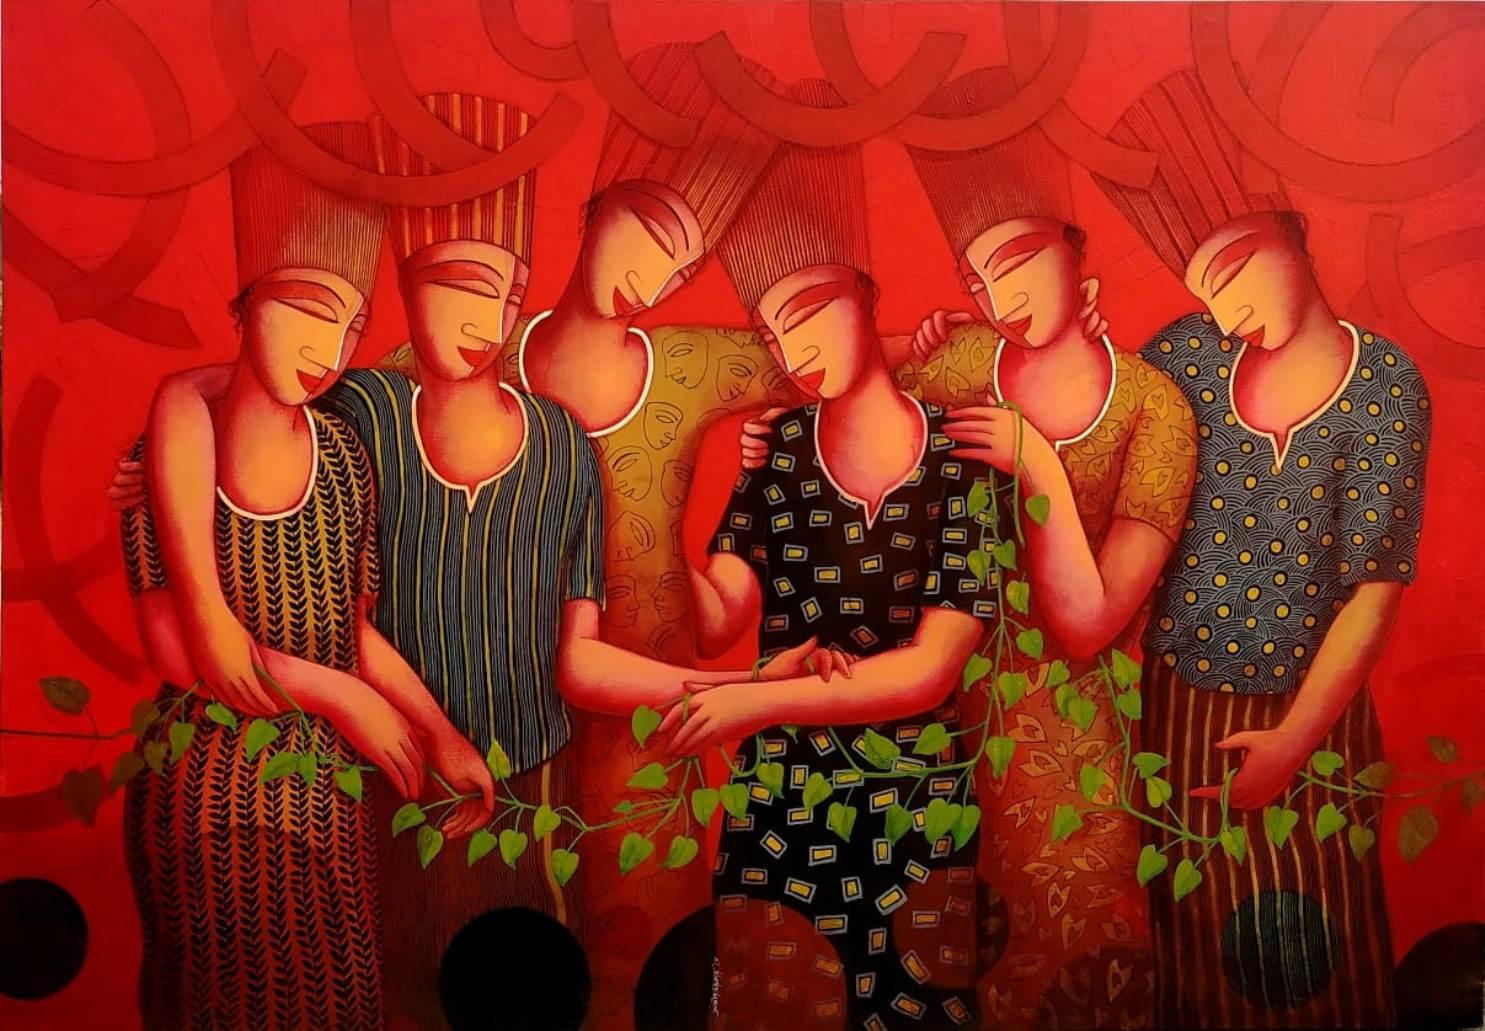 Friendship, Acrylic on Canvas by Contemporary Indian Artist “In Stock”